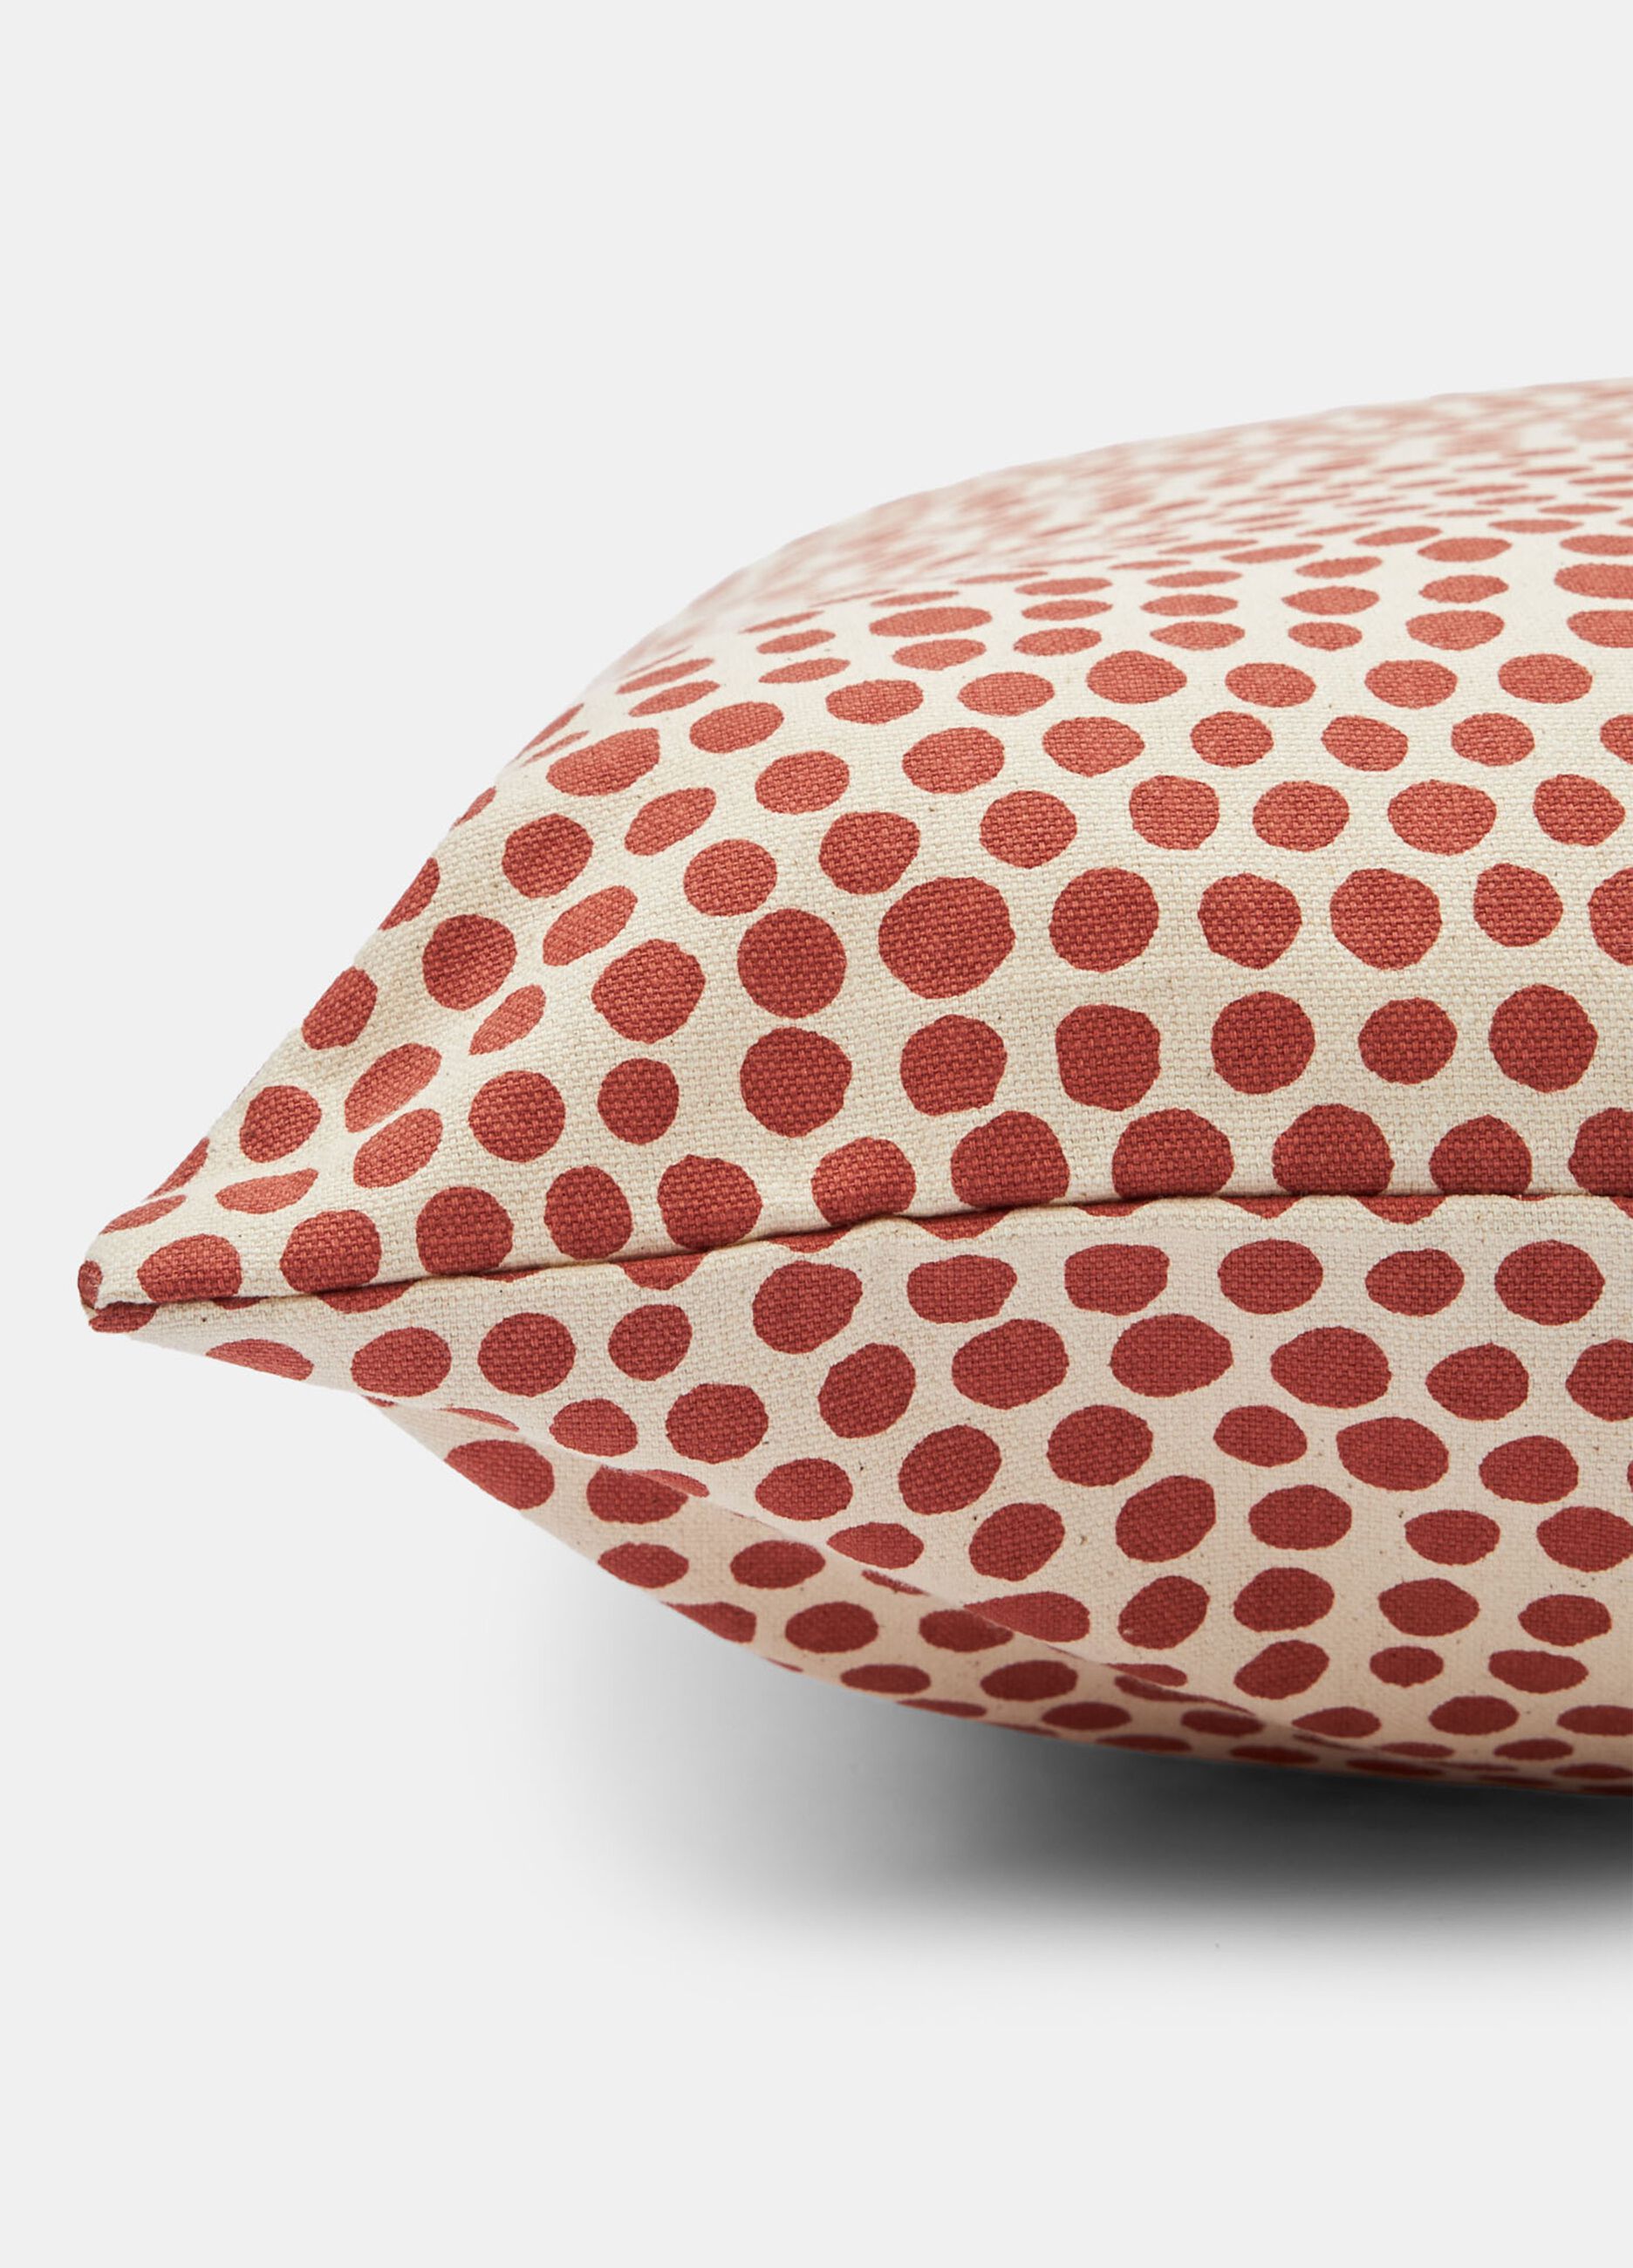 Polka dot cushion with cotton cover